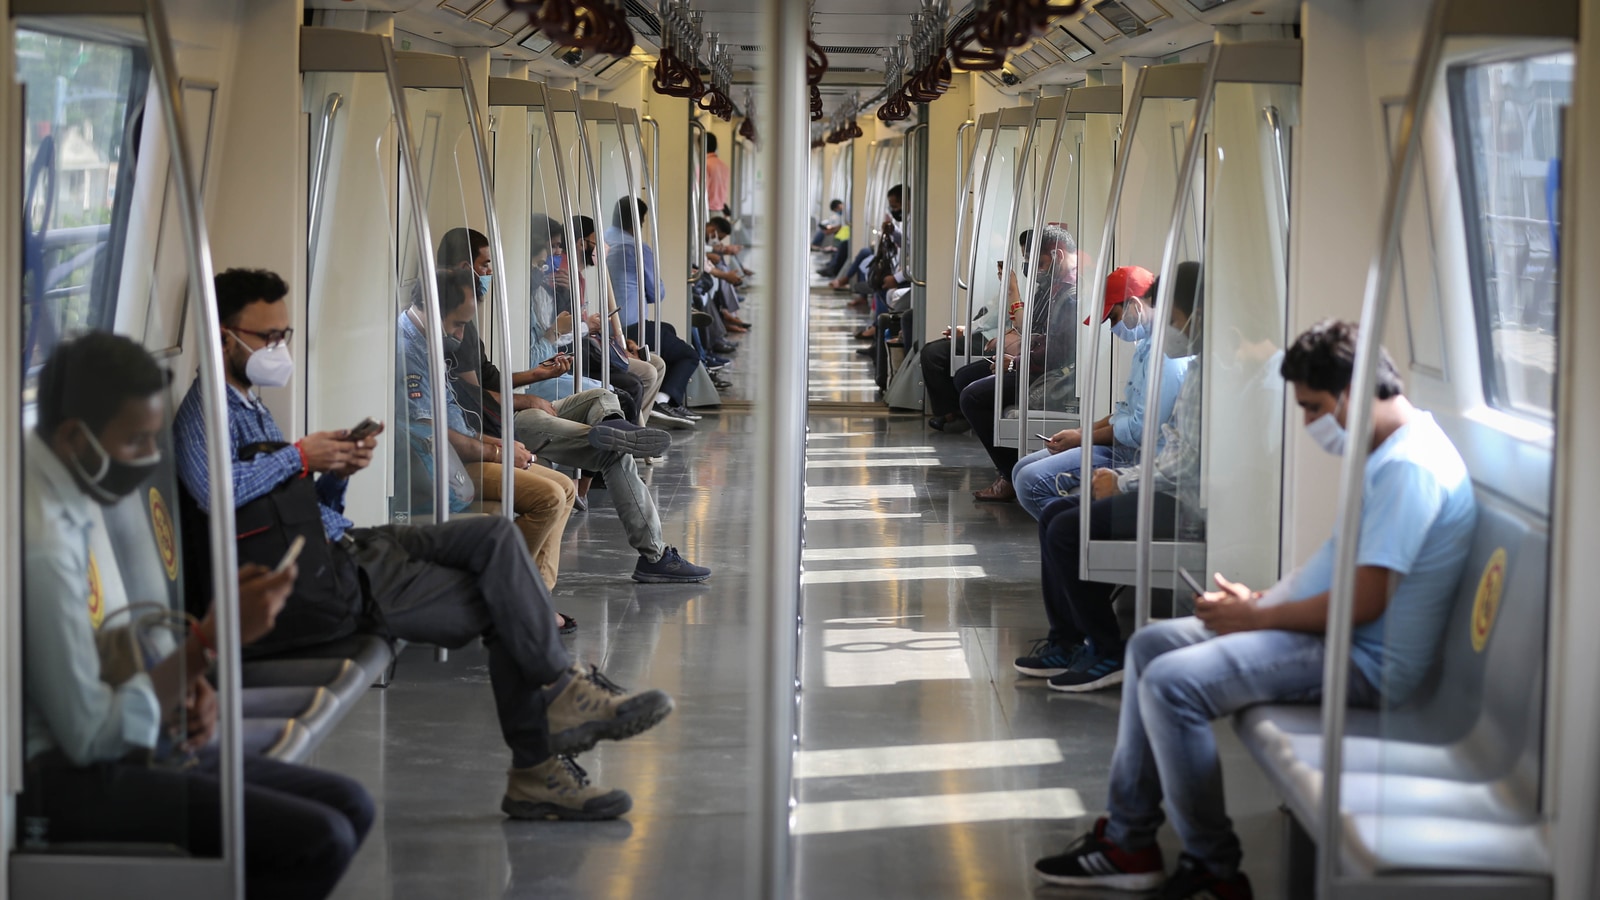 After fresh Covid-19 curbs, Delhi Metro to run at 100% seating capacity  with no standing passengers | Latest News Delhi - Hindustan Times